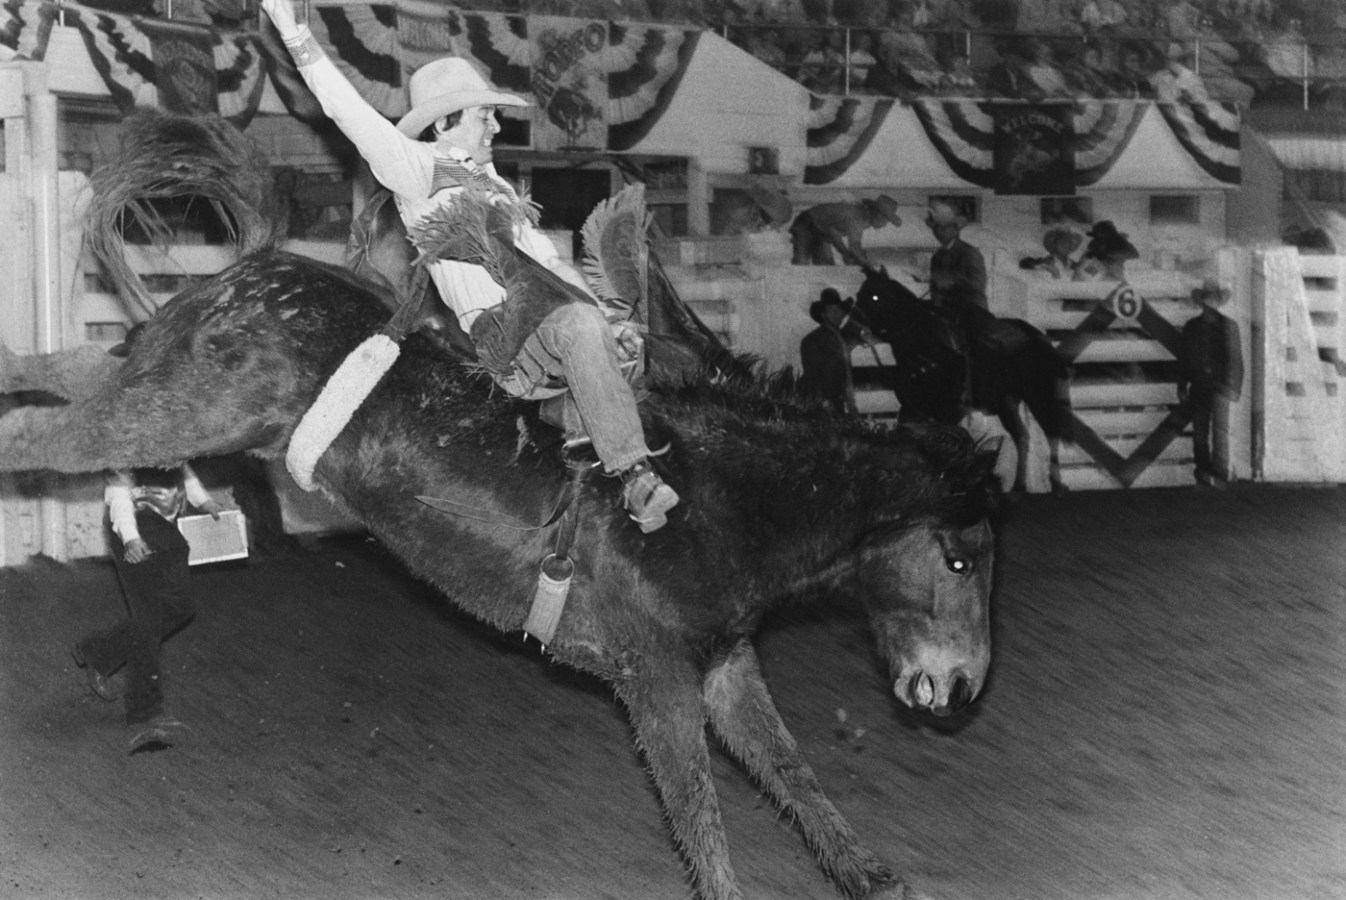 Black-and-white photograph of a cowboy with one arm raised sitting astride a bucking horse